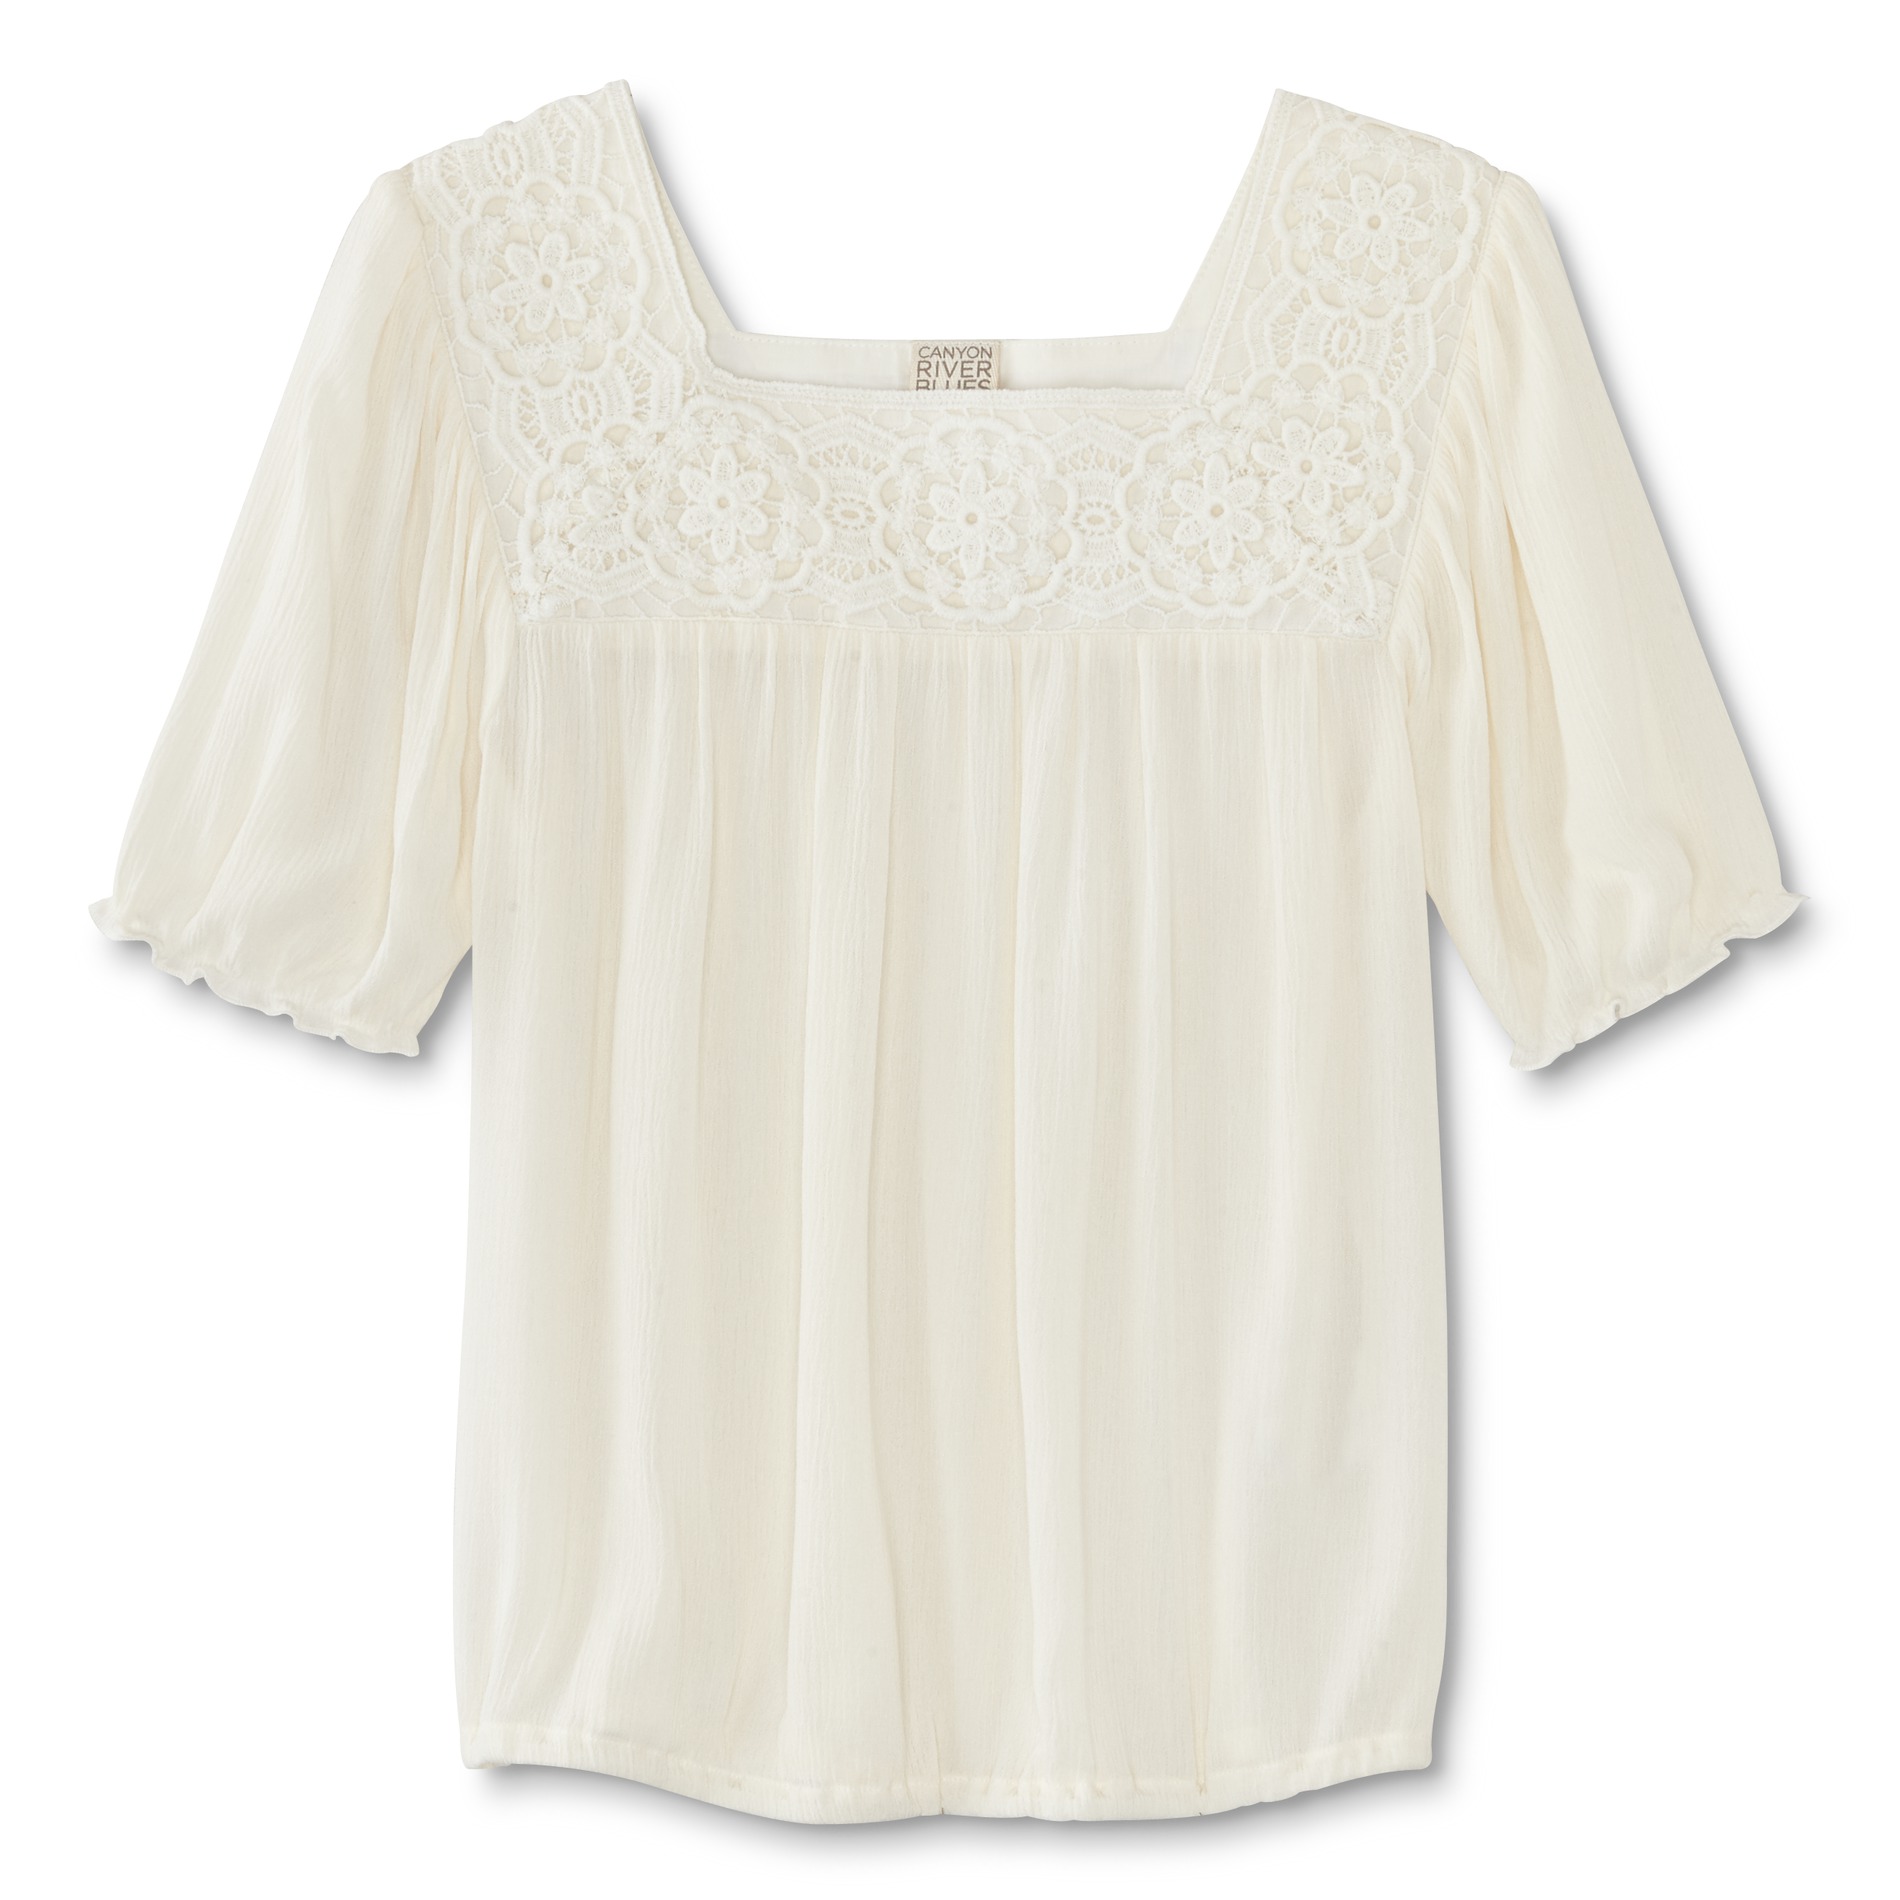 Girl's Lace Peasant Top